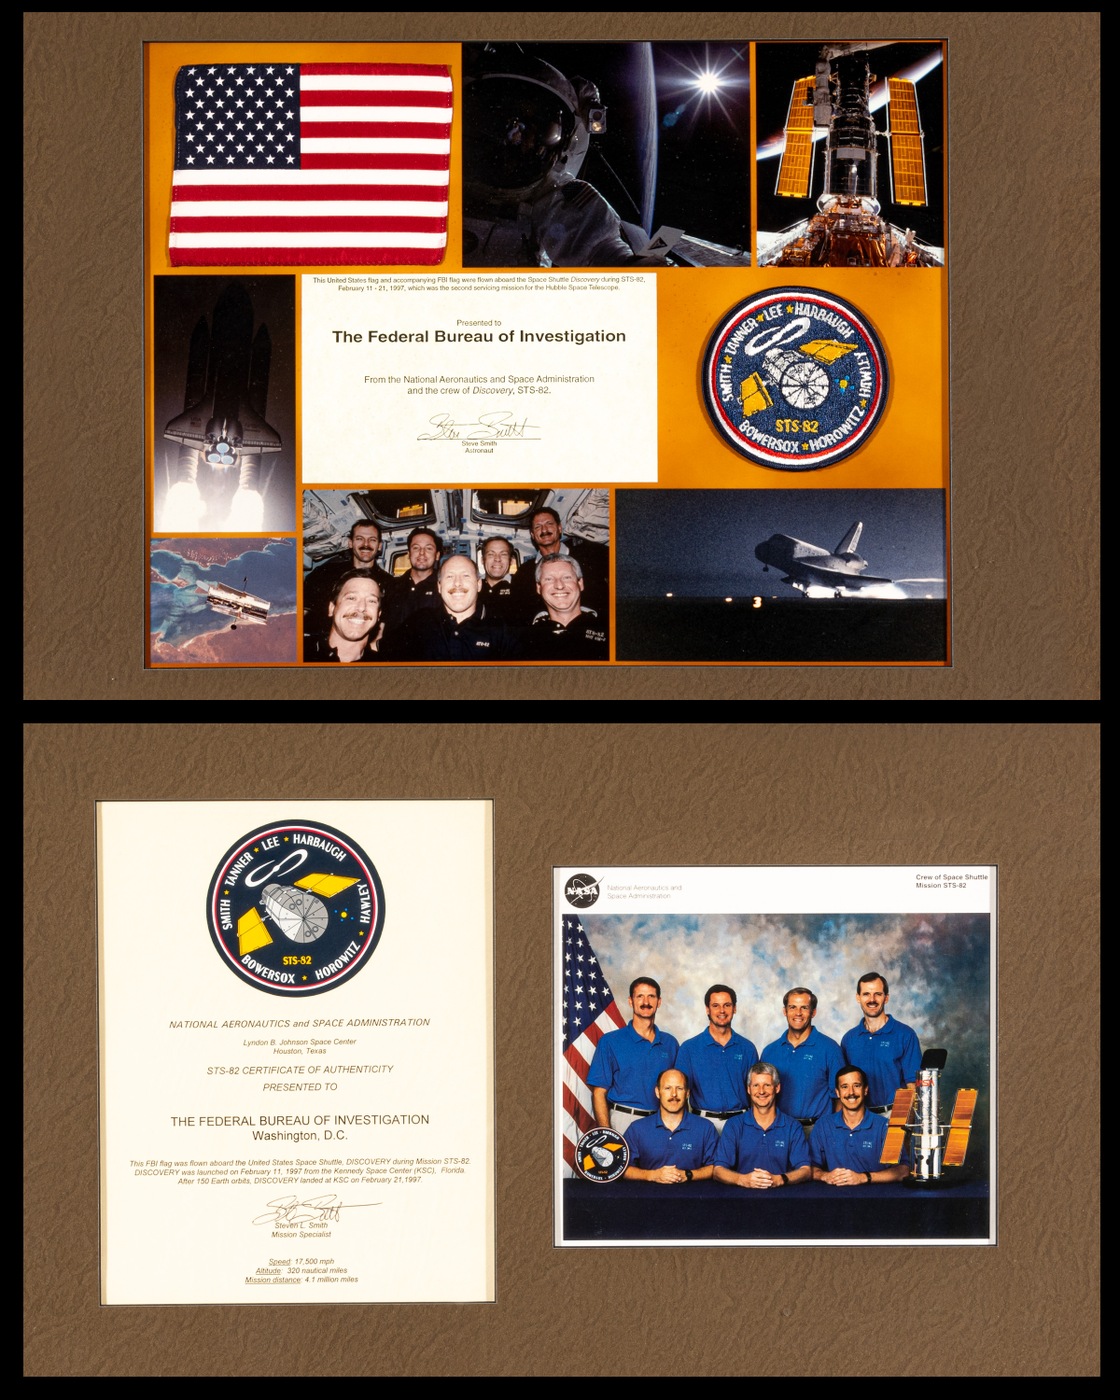 Two framed collages from the flight accompany a certificate of authenticity for the flag. Included is a U.S. flag patch that was also flown aboard STS-82.